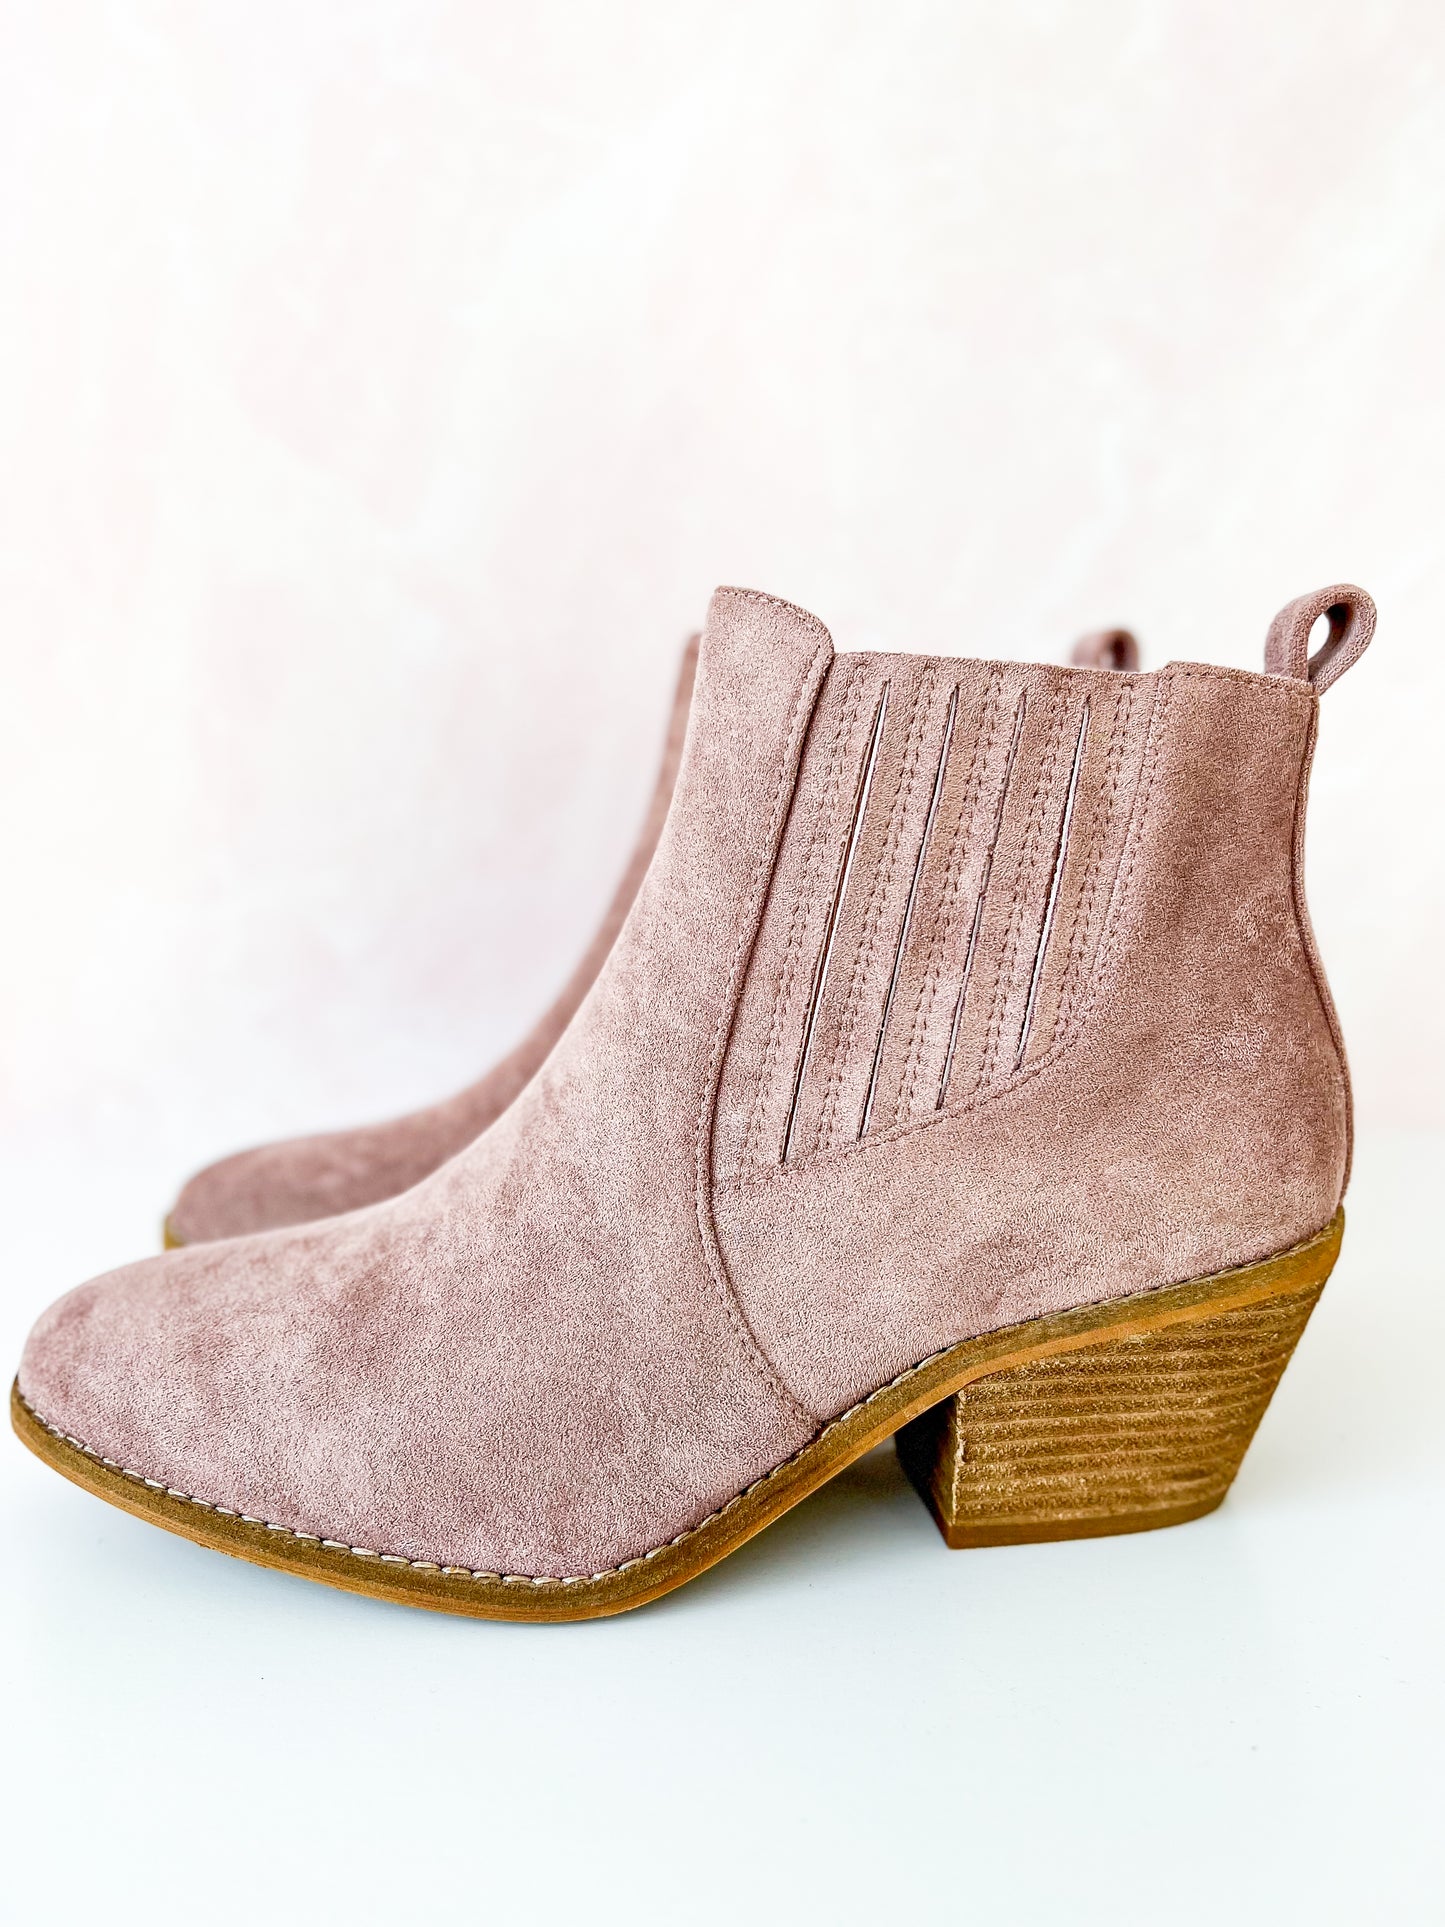 Corky's Potion Boot - Blush Suede